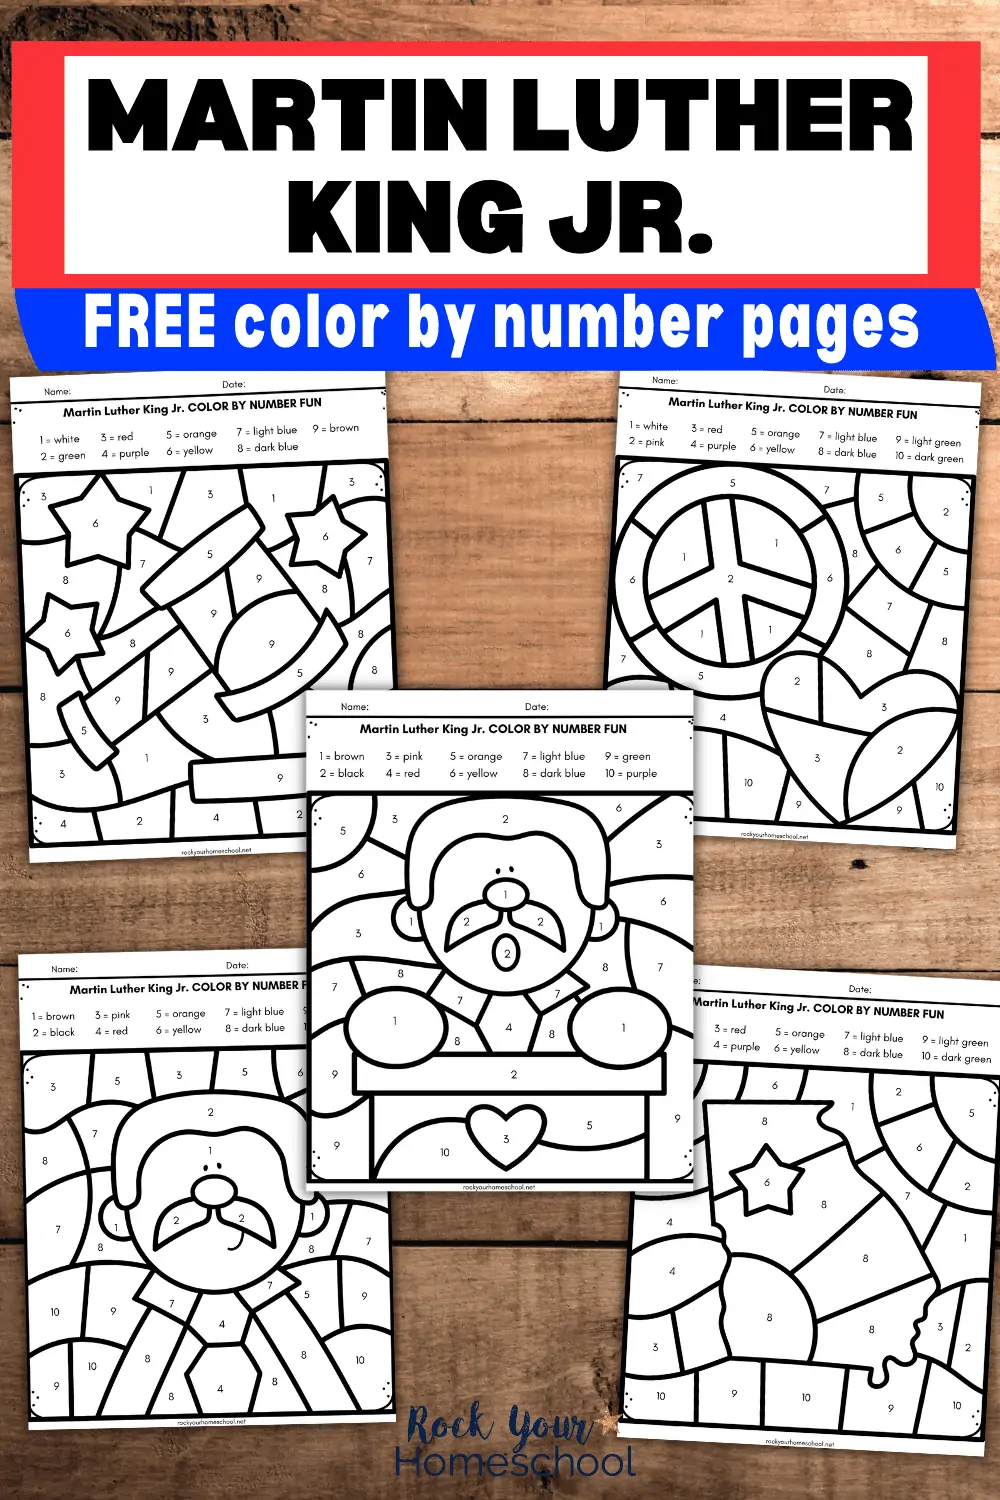 5 Free Martin Luther King Jr. Coloring Pages: Simple and Fun Activities